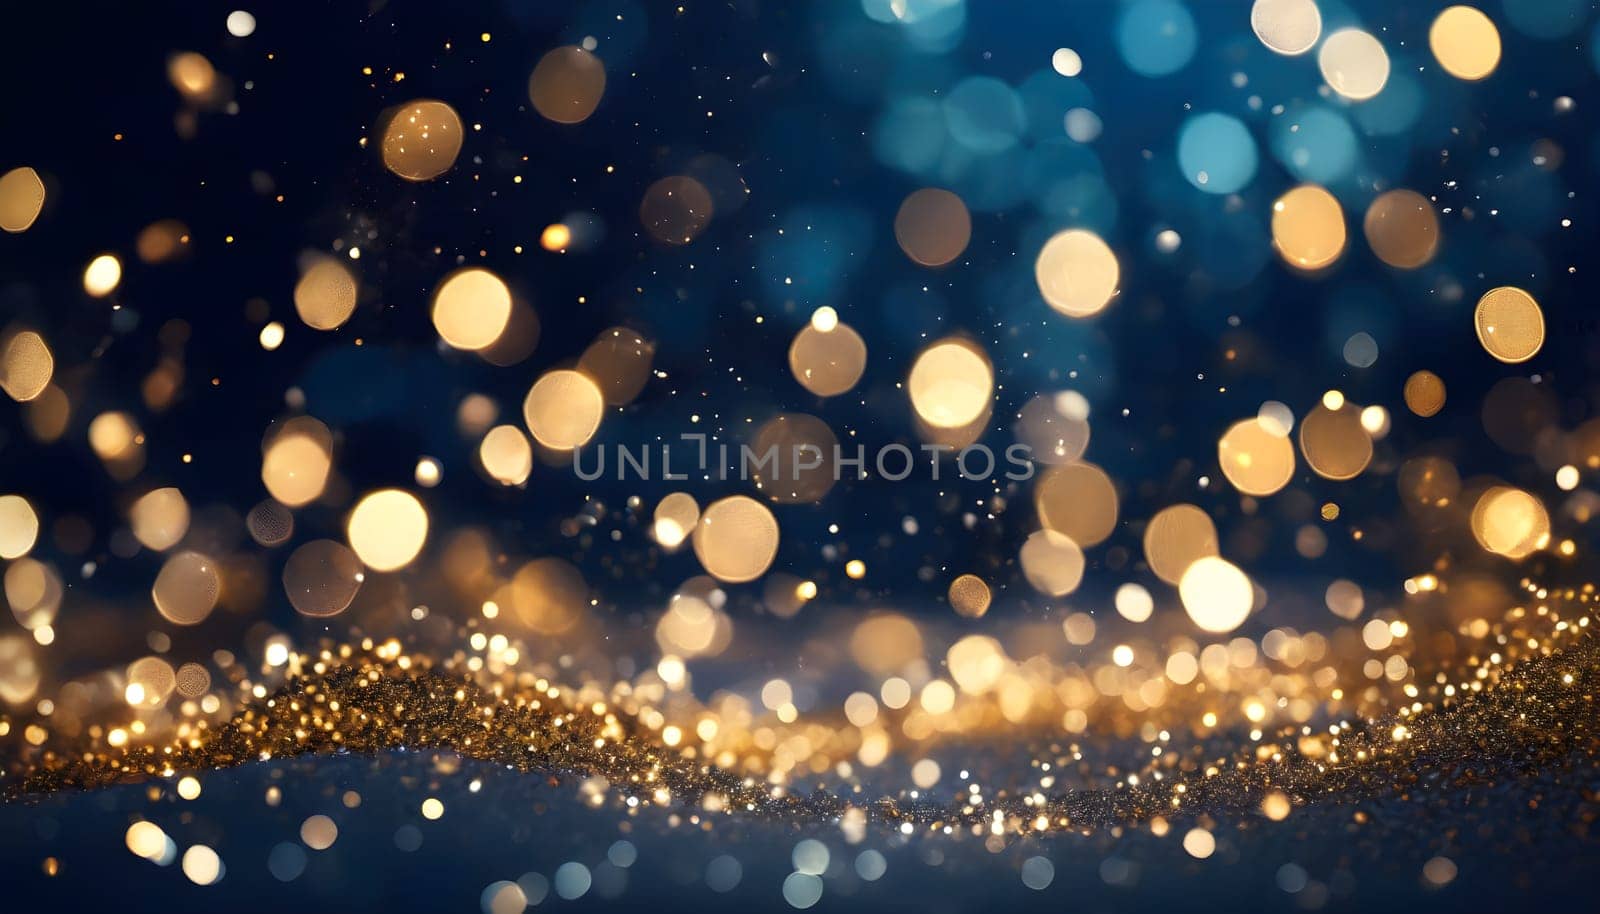 A stunning winter wonderland with golden particles dancing in the air, creating a mesmerizing bokeh effect against a deep navy background by Designlab